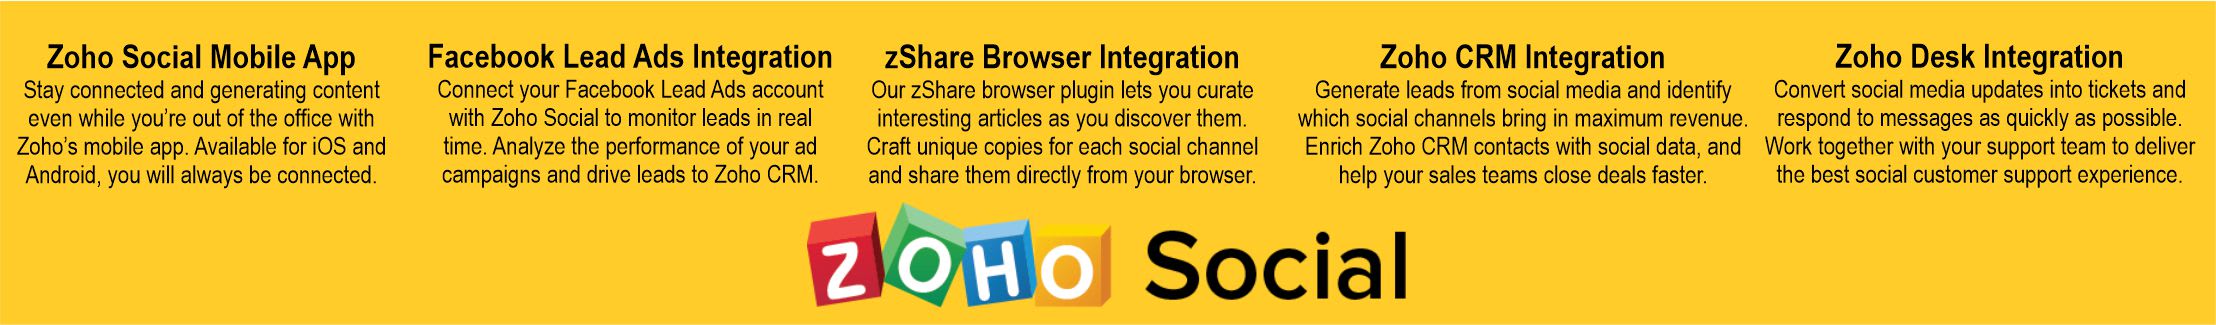 Zoho Social Additional Features & Integrations banner